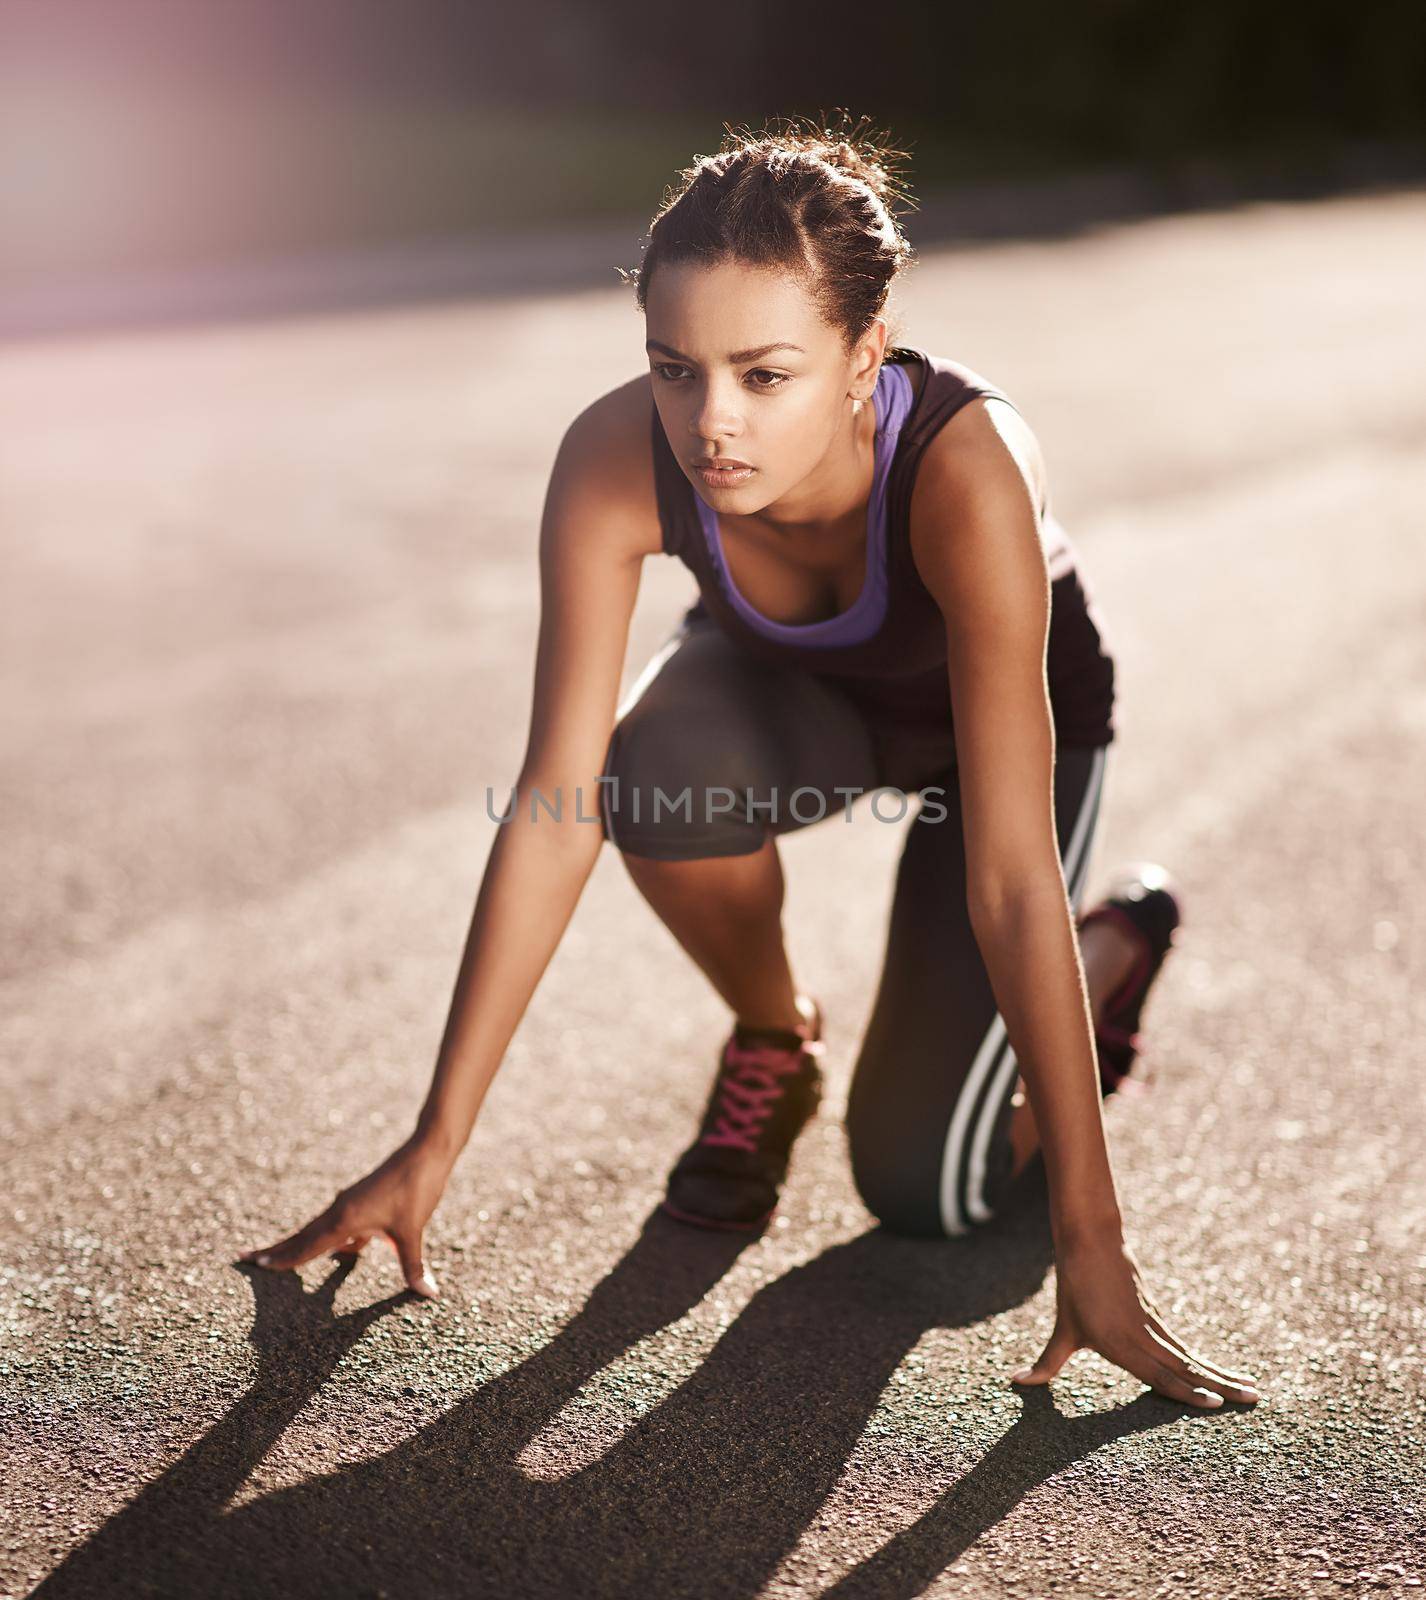 Fitness is a lifestyle with no finish line. a young woman in the starting position for a run